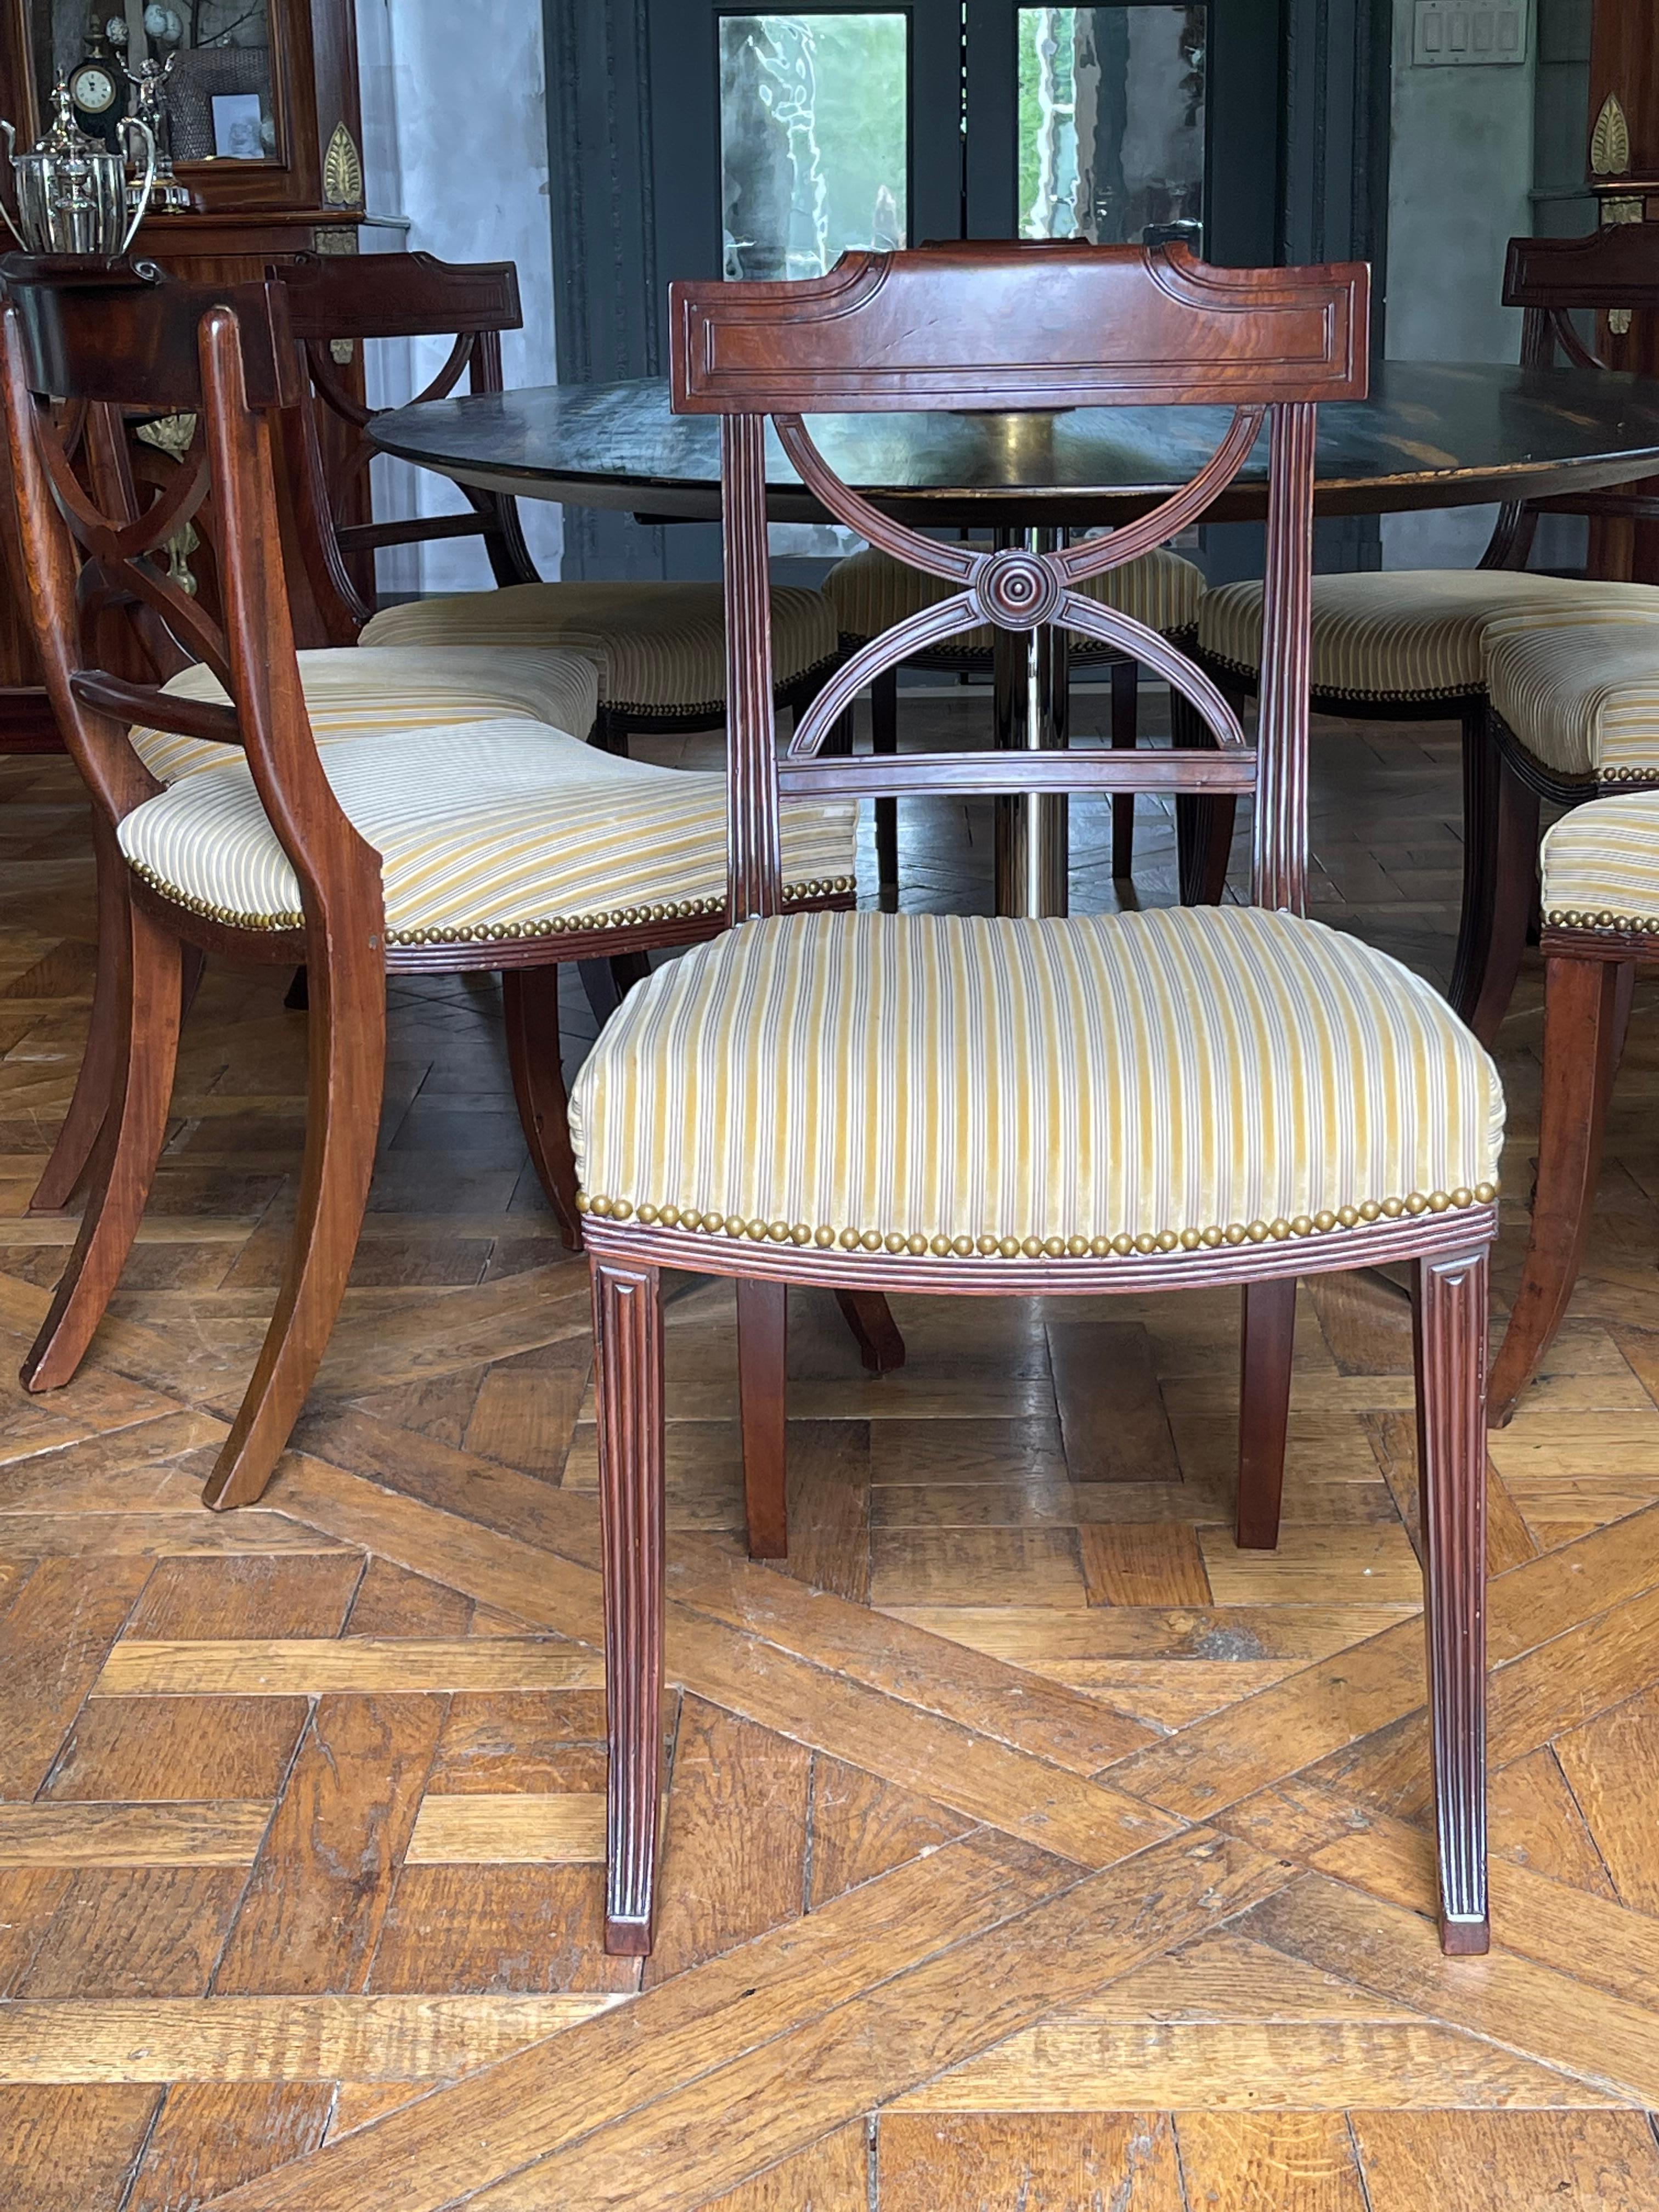 8 Set of ca 1820 Regency Dining Room Chairs  In Good Condition For Sale In New Haven, CT